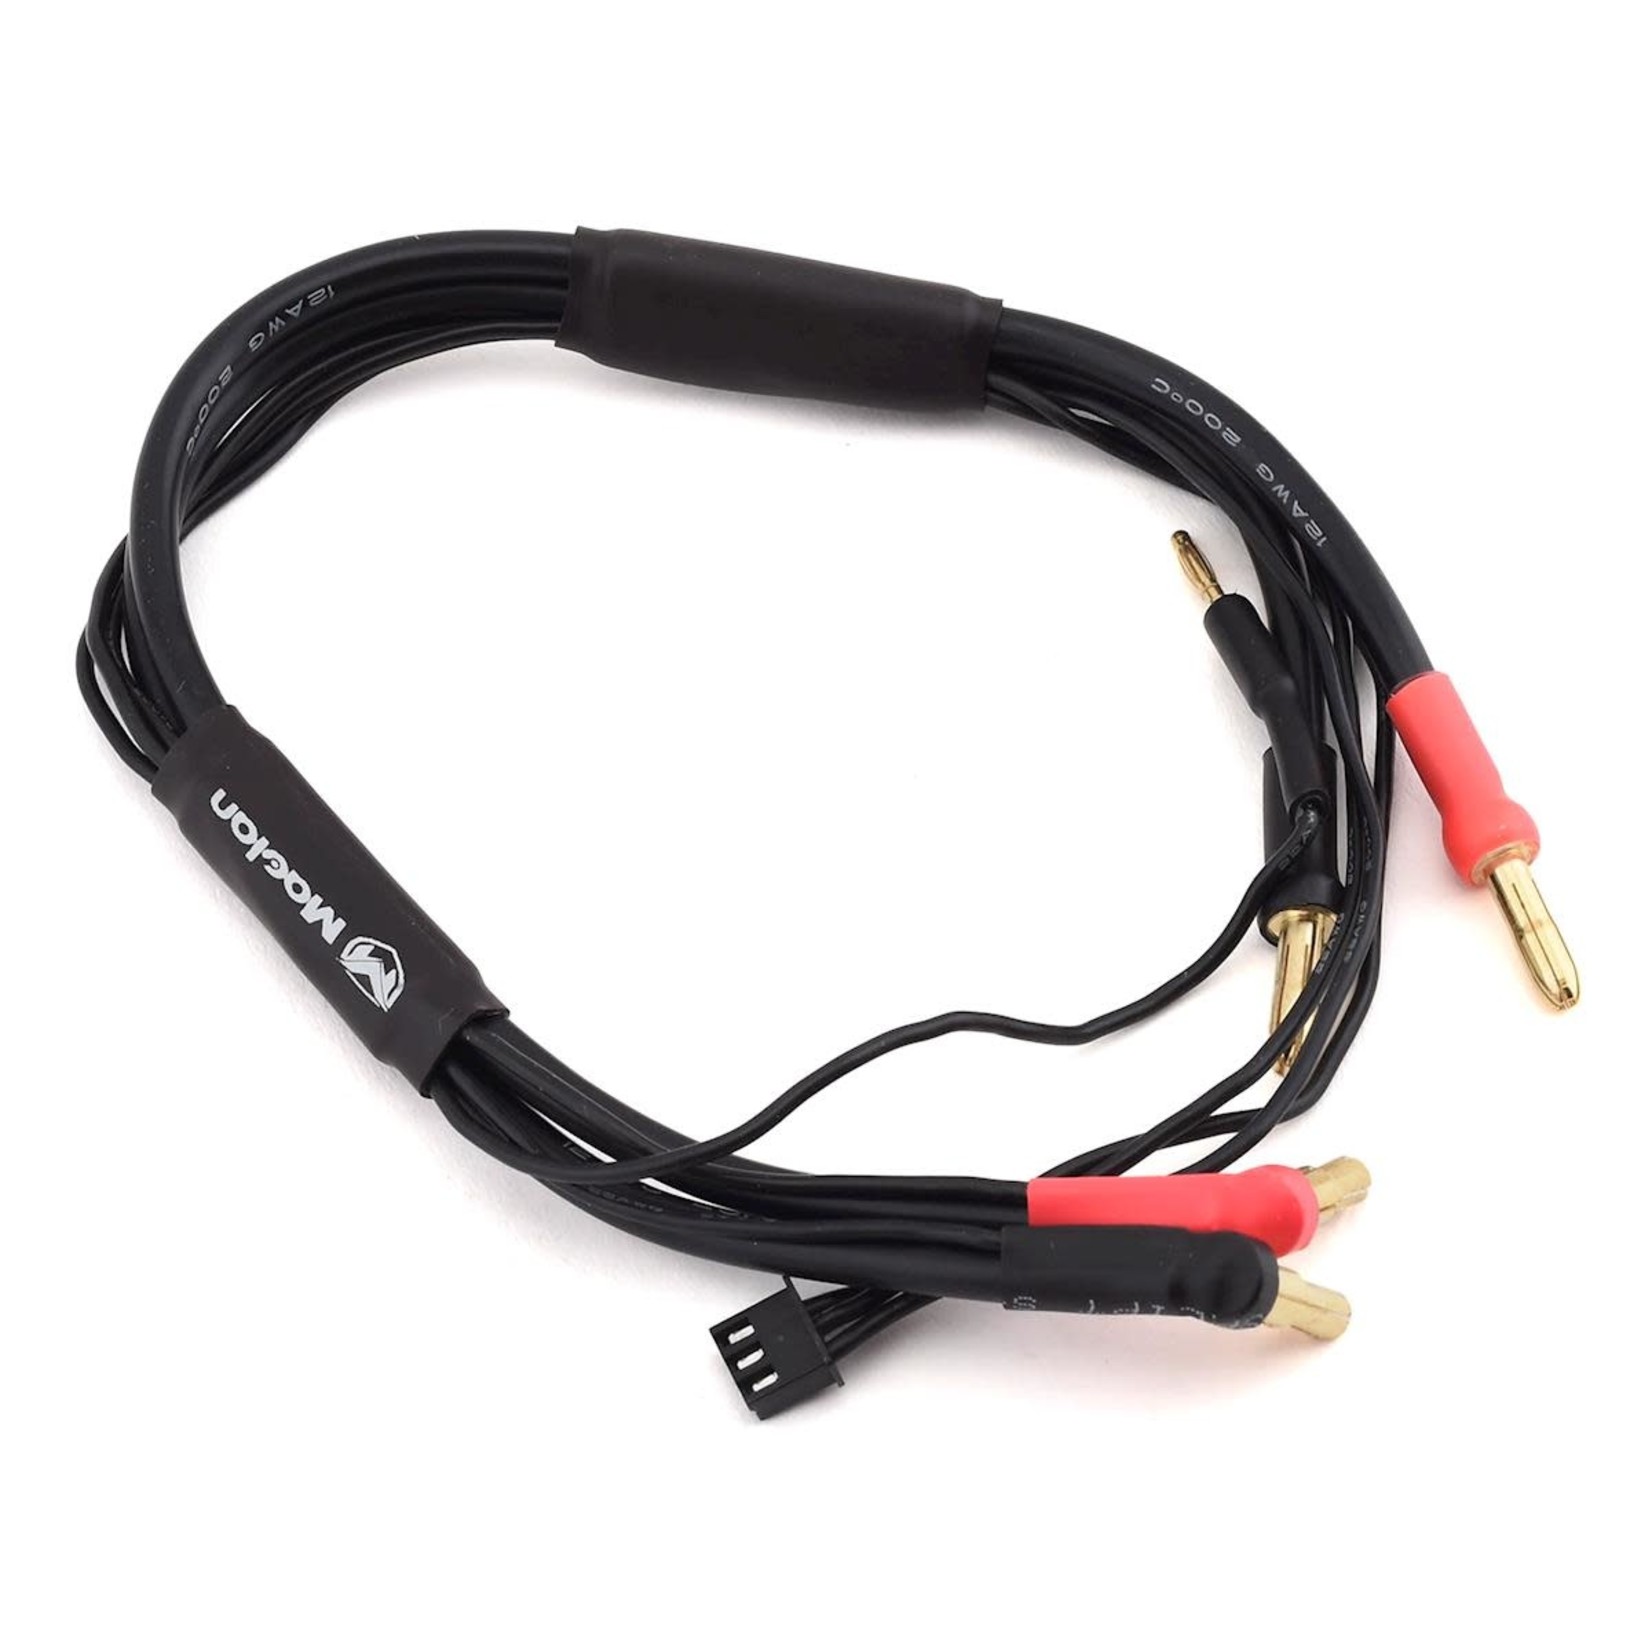 Maclan Maclan Max Current V2 2S Charge Cable Lead (30cm) #MCL4190